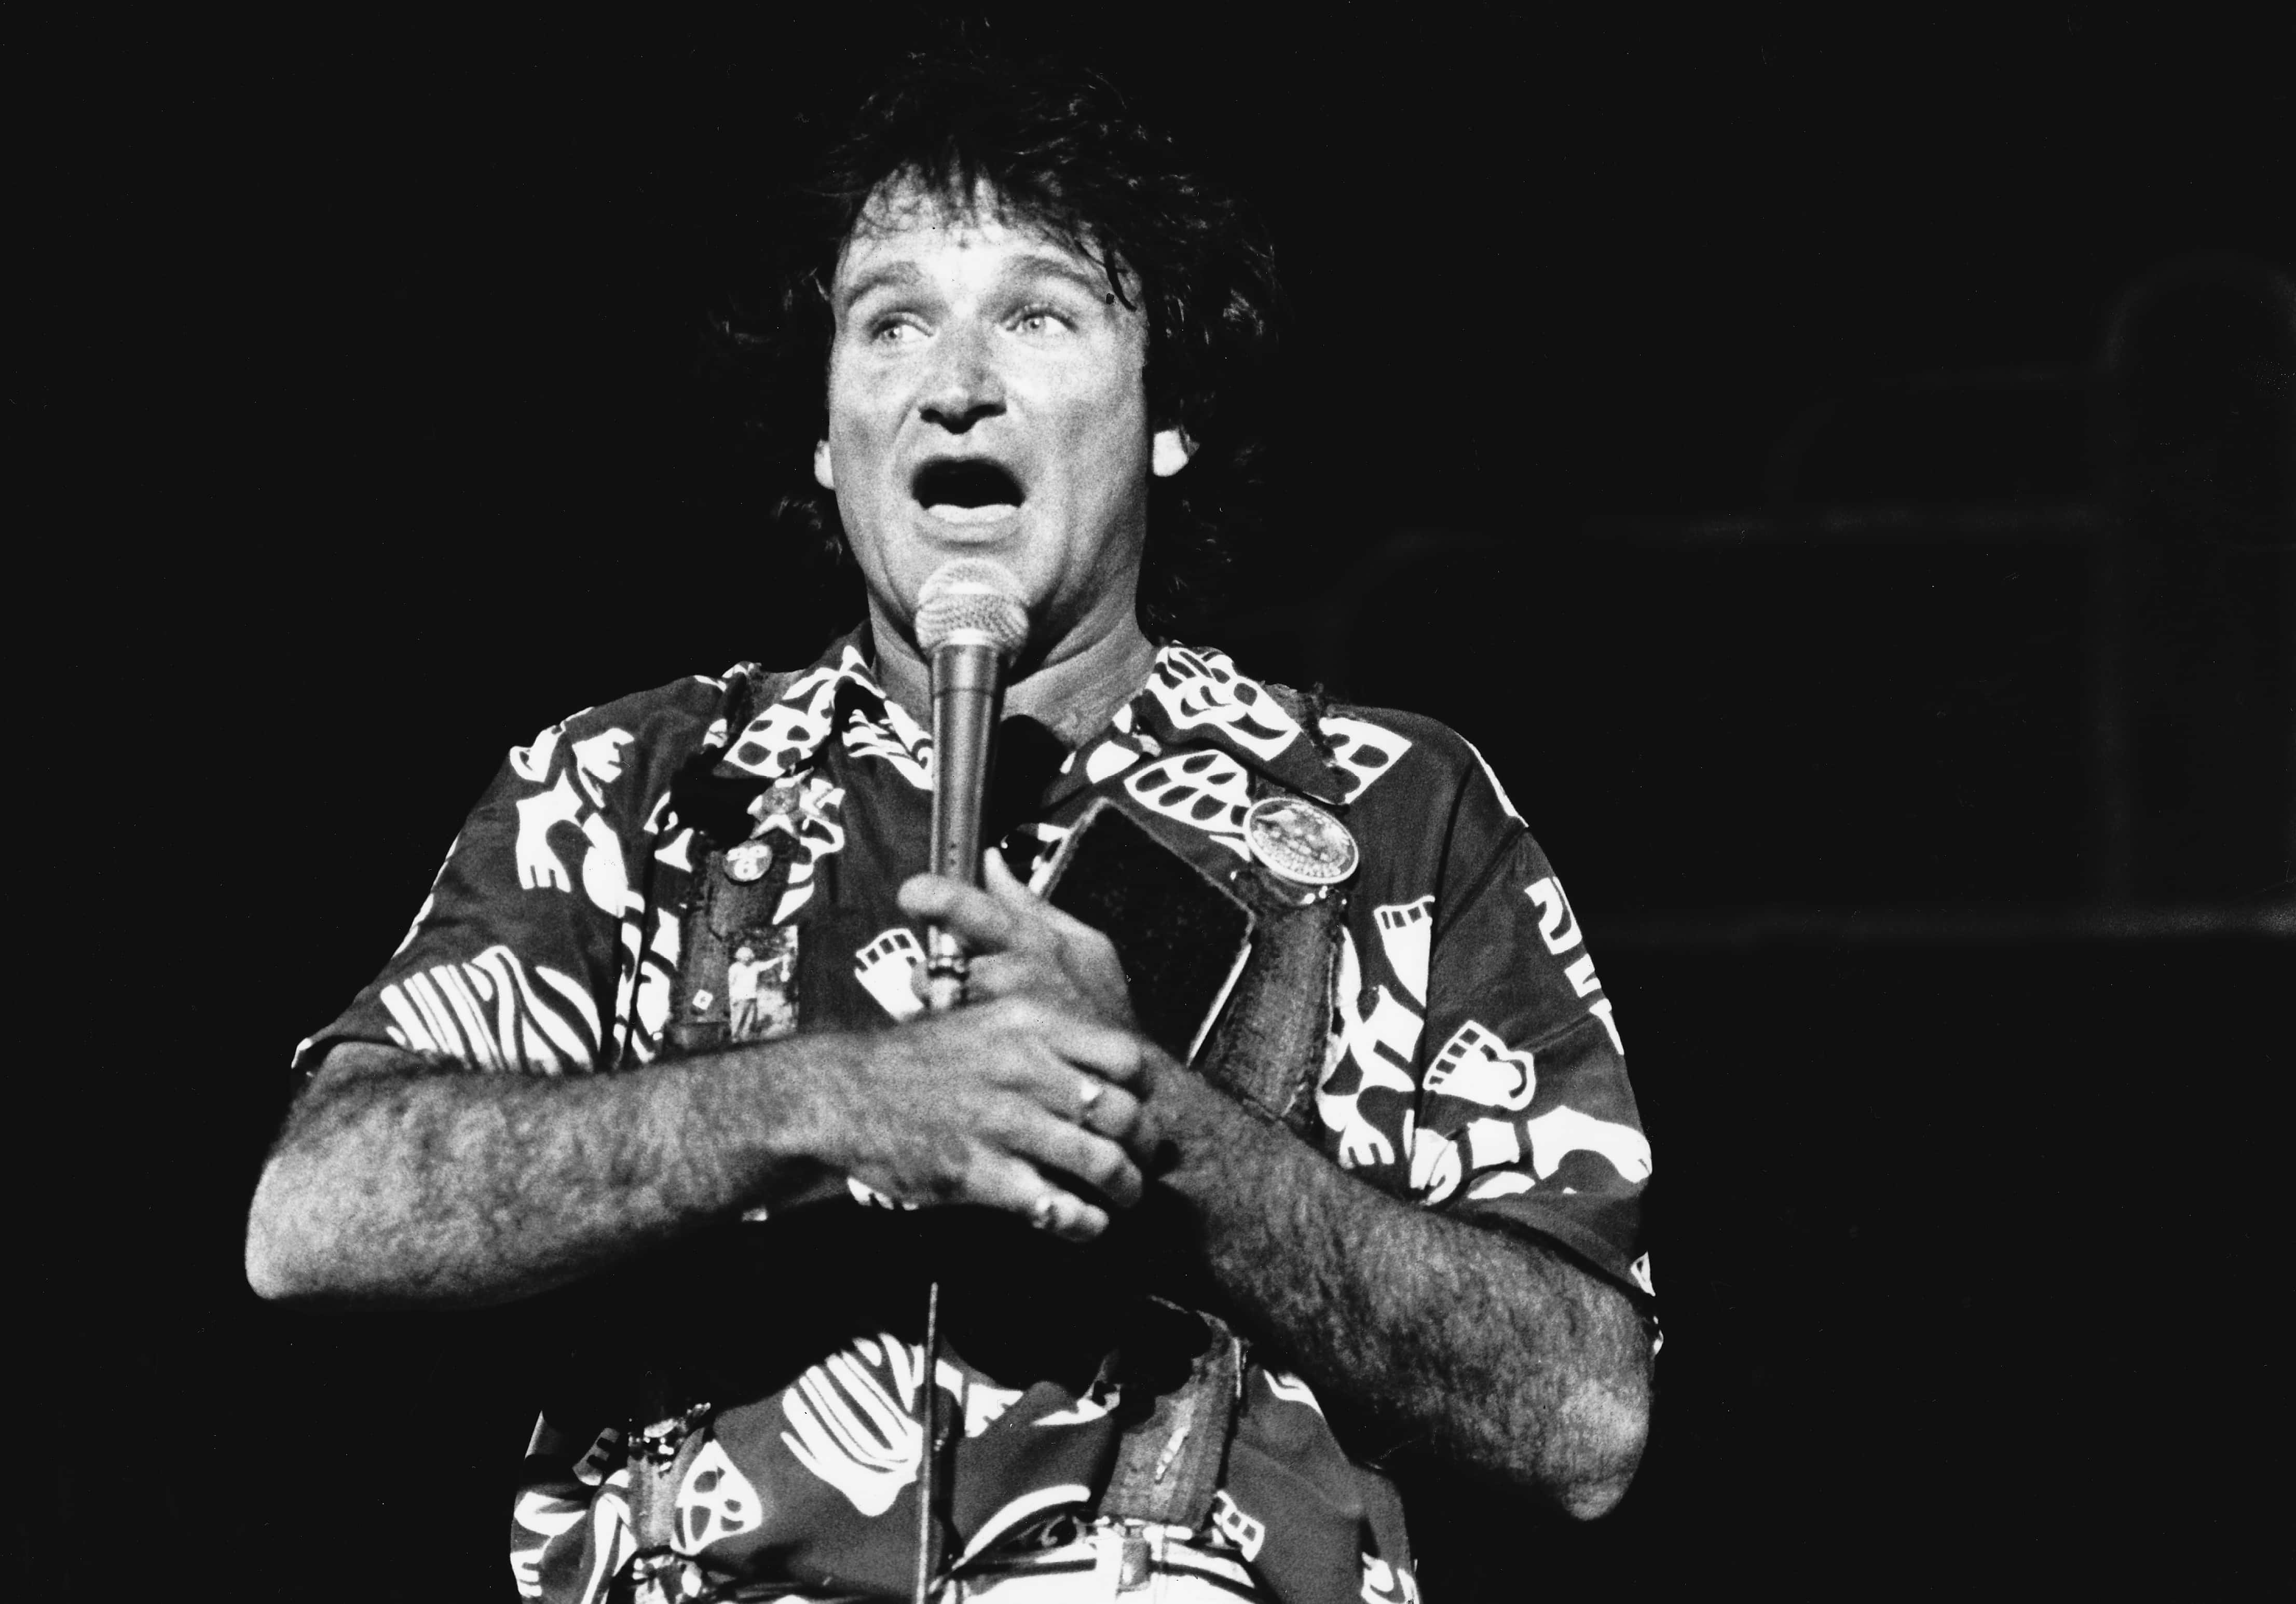 Robin Williams performs at the Universal Amphitheater on July 1, 1979.